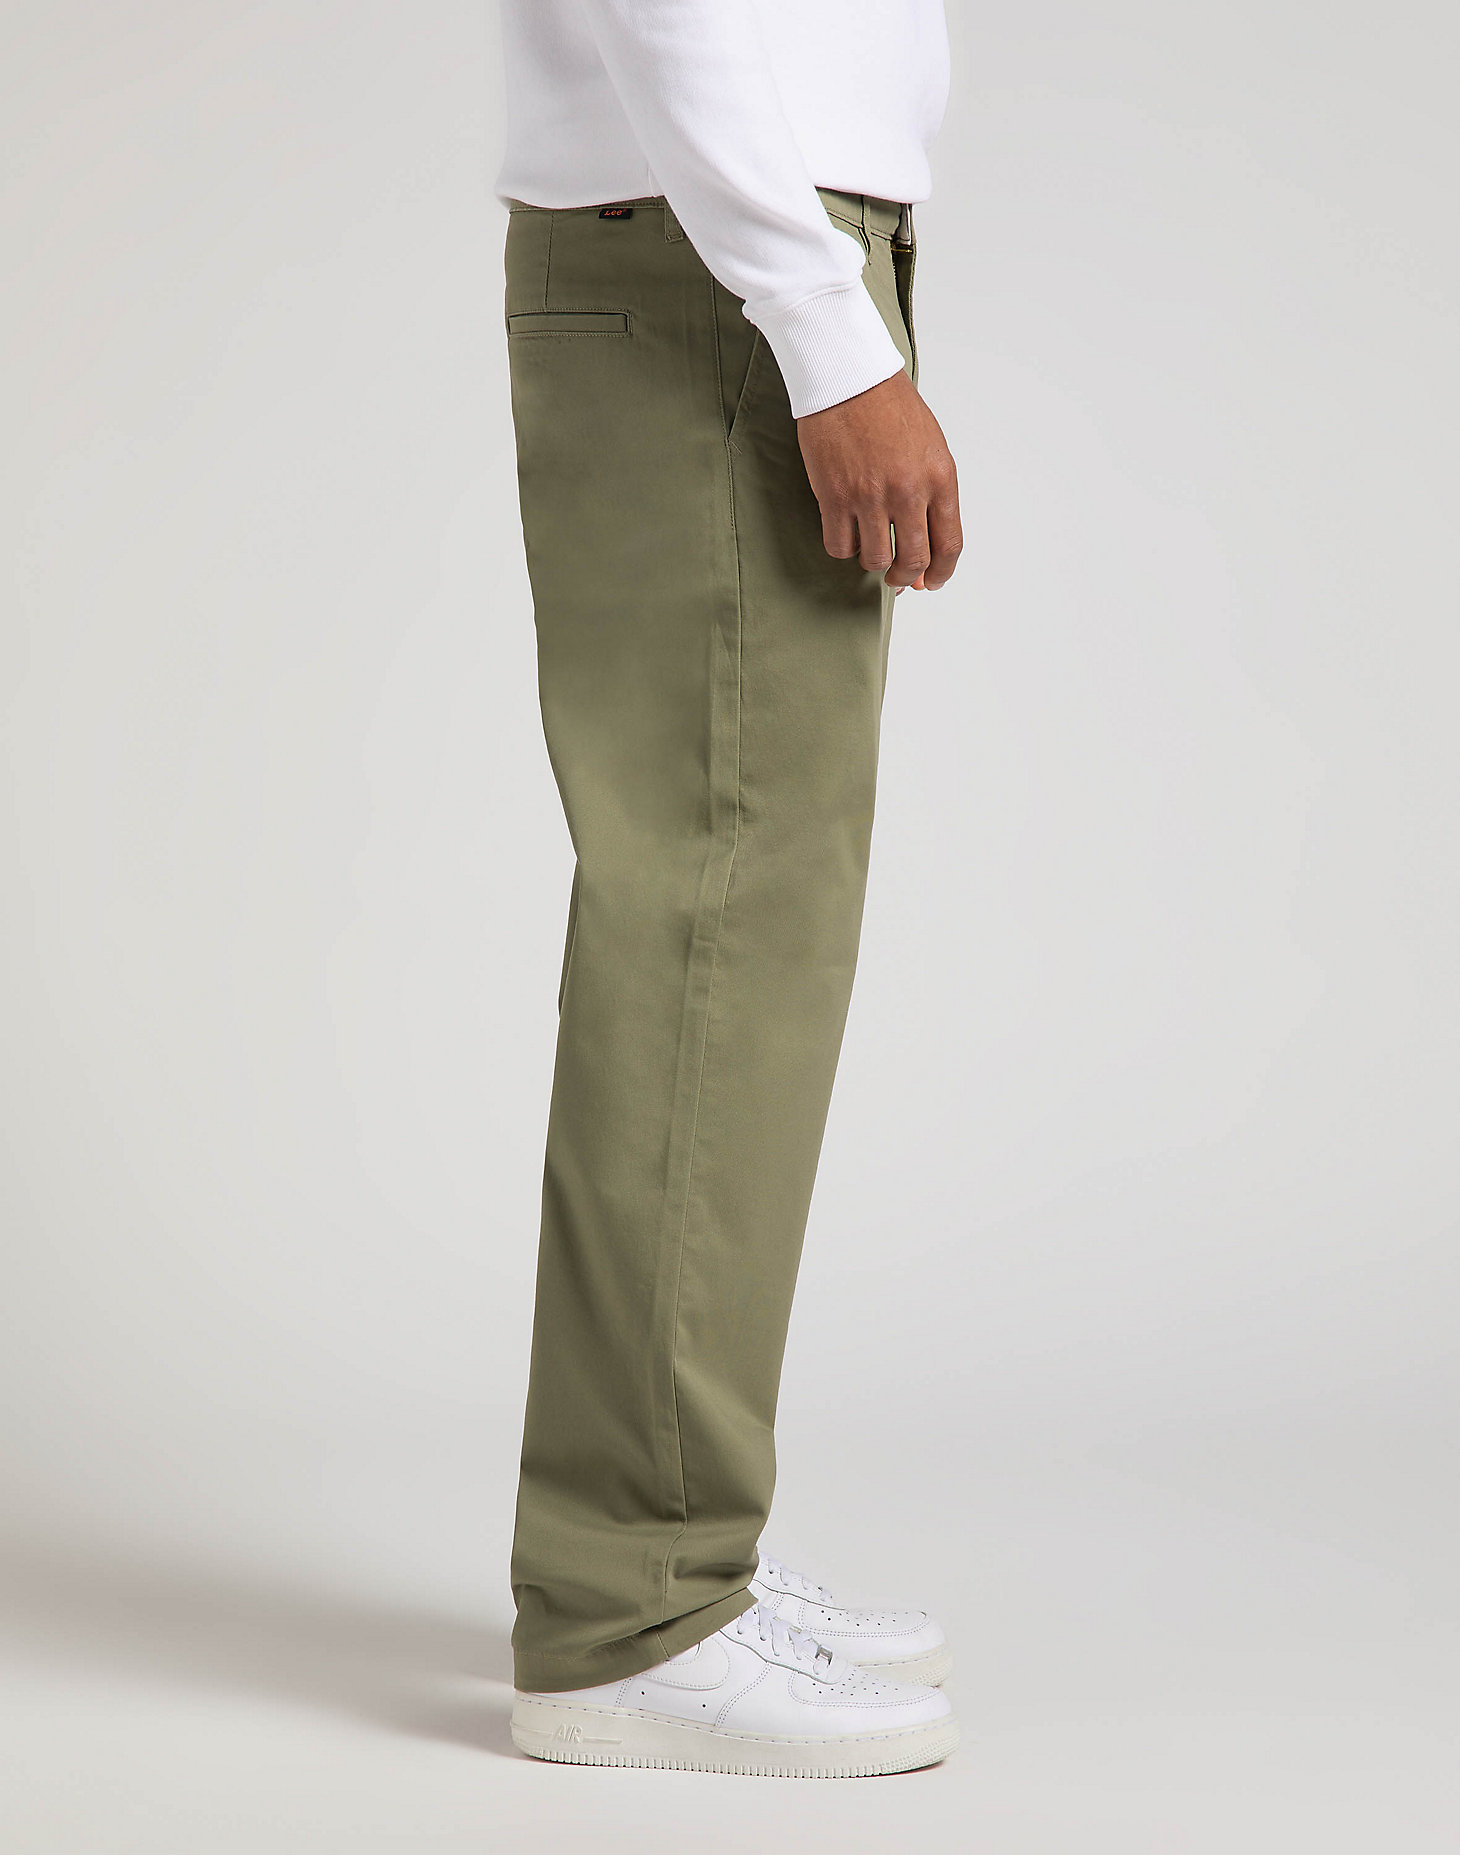 Relaxed Chino in Olive Green alternative view 3